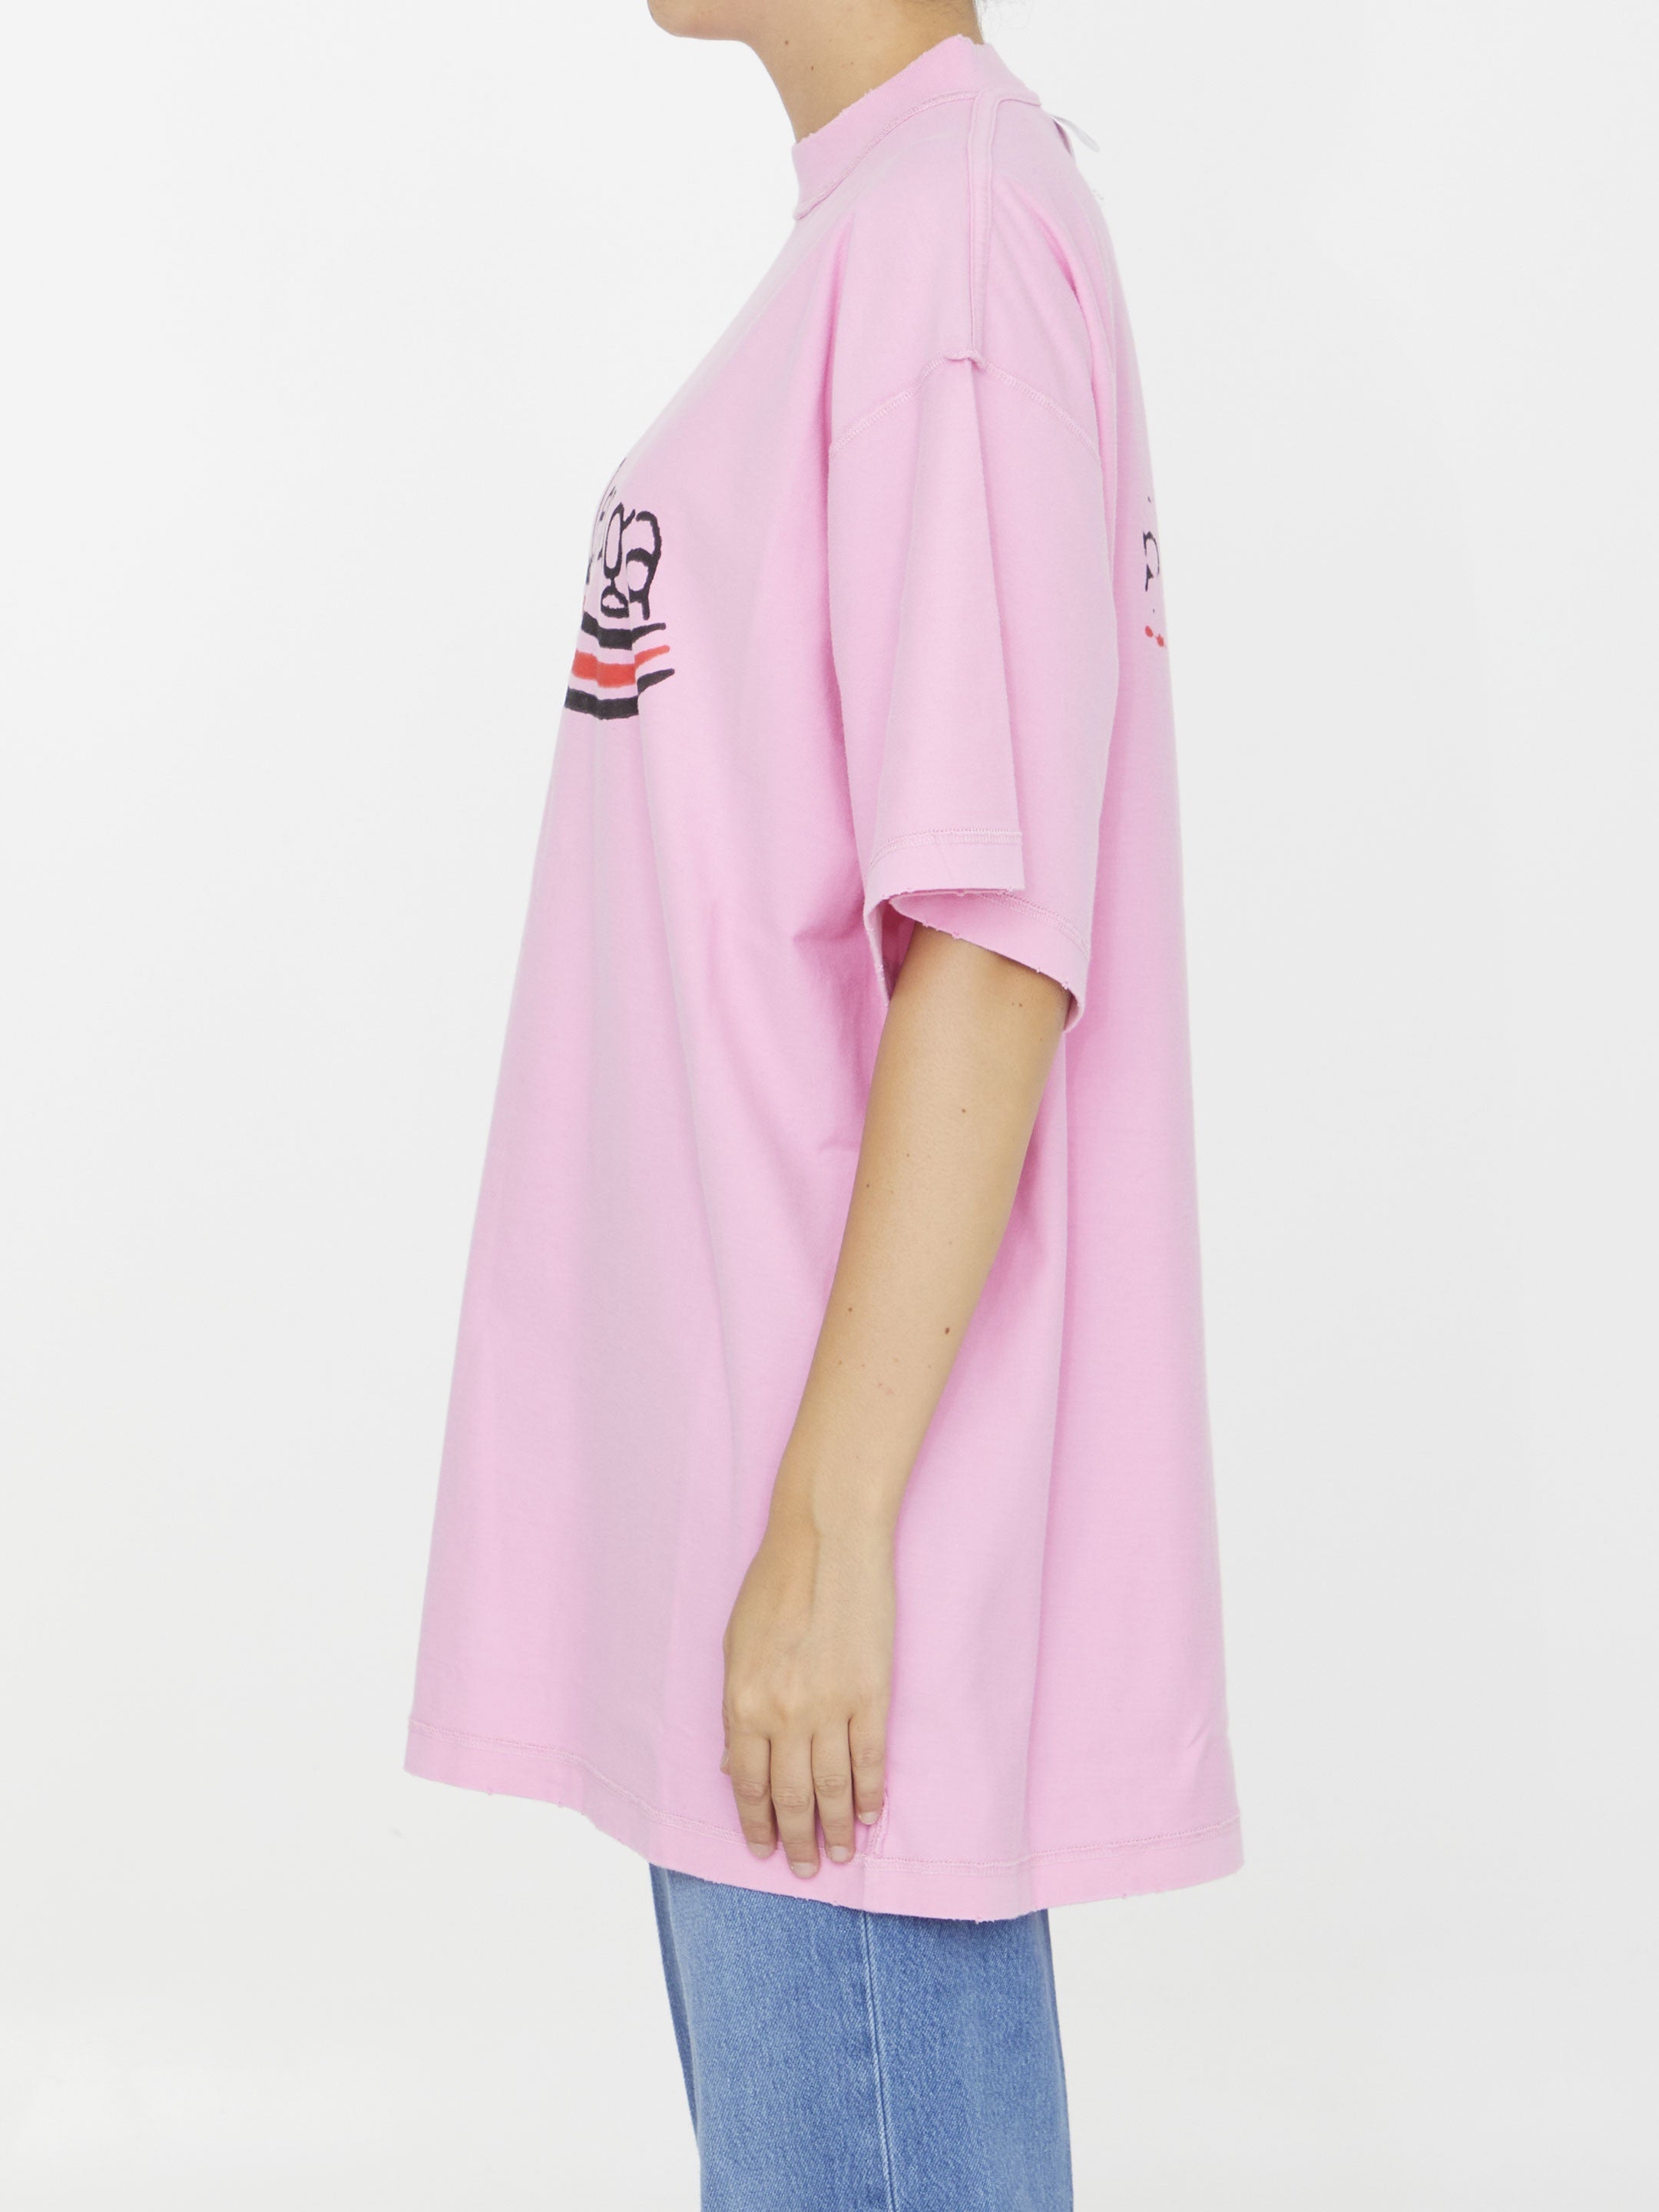 BALENCIAGA-OUTLET-SALE-Logo-t-shirt-Shirts-01-PINK-ARCHIVE-COLLECTION-3.jpg